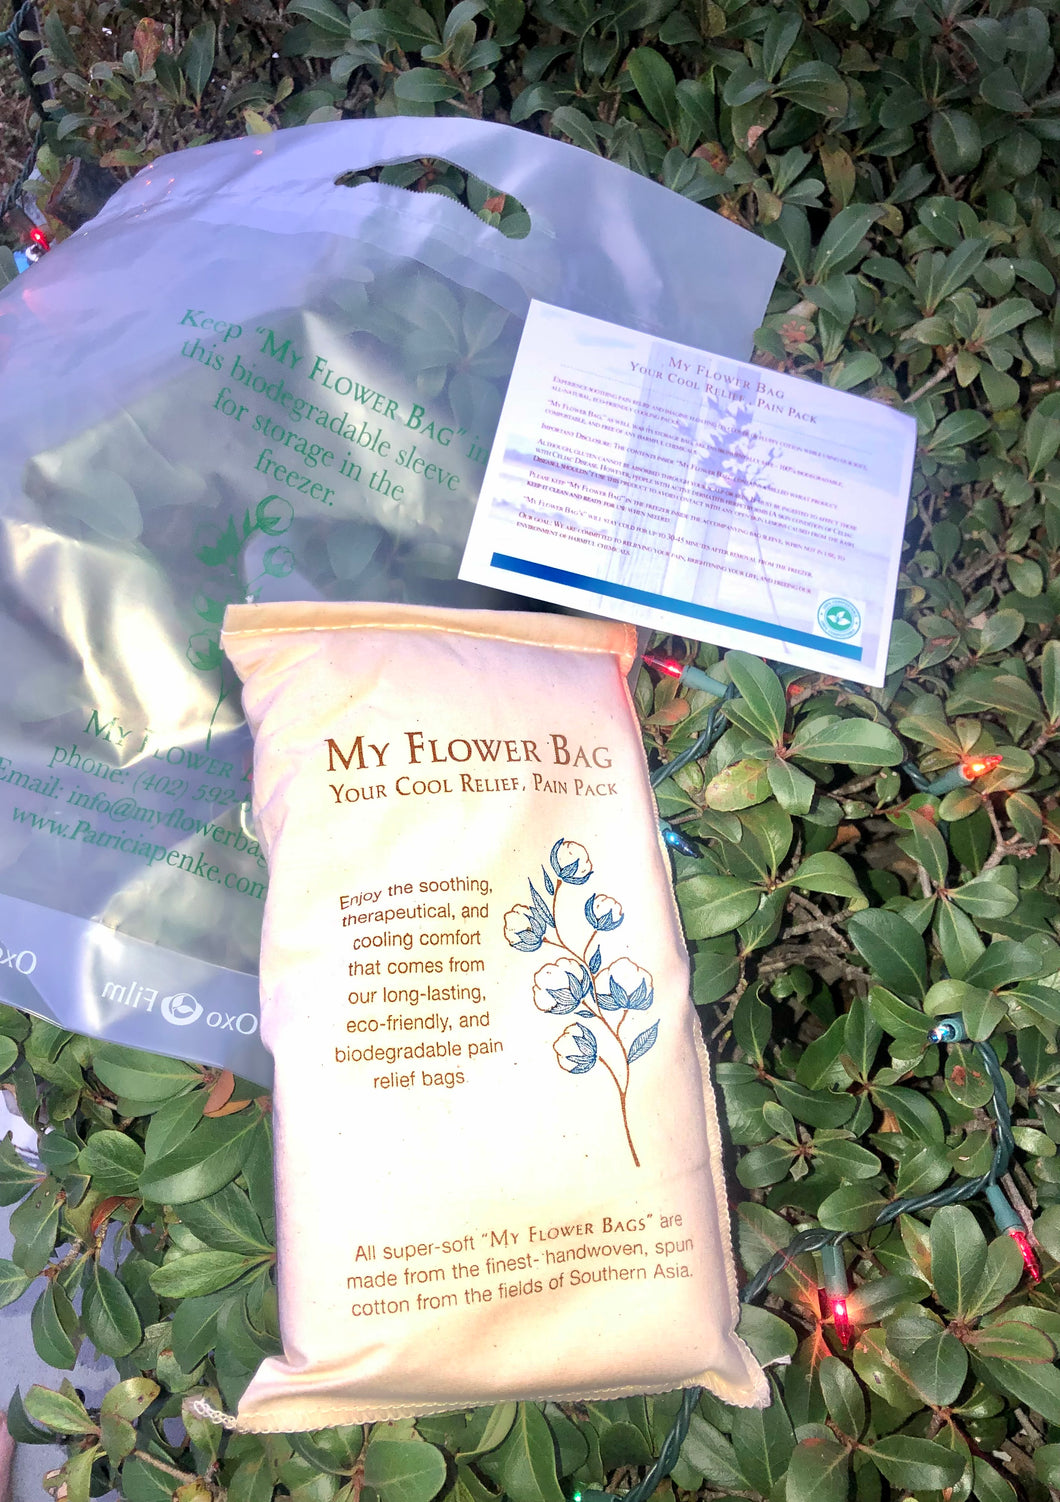 My Flower Bag Therapeutic Cold Pain Relief Packs